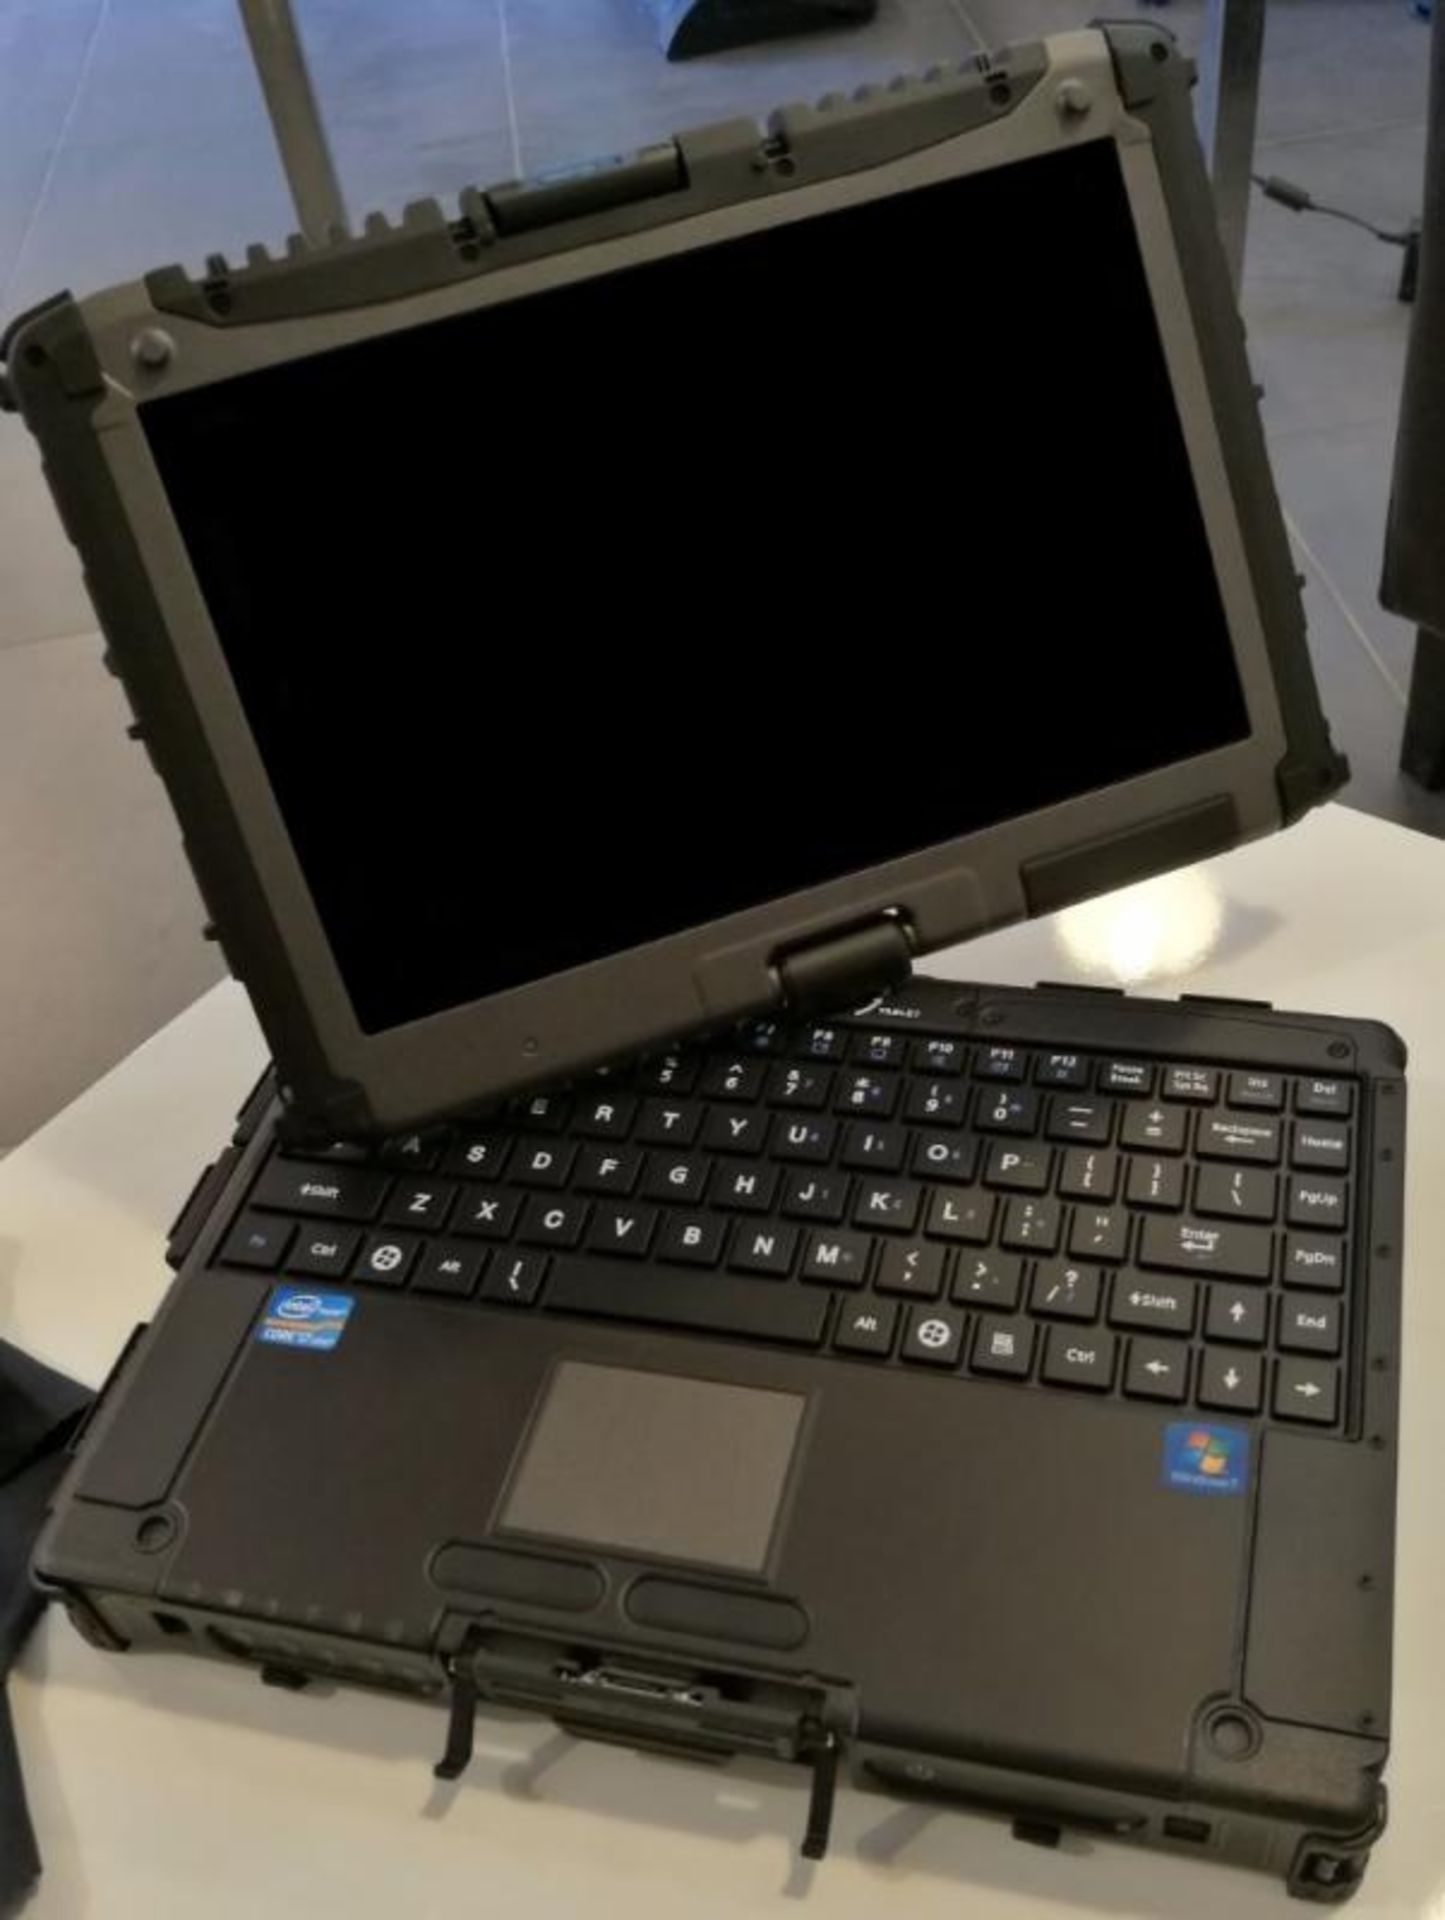 1 x Getac V200 Rugged Laptop Computer - Rugged Laptop That Transforms into a Tablet PC - Features an - Image 3 of 9